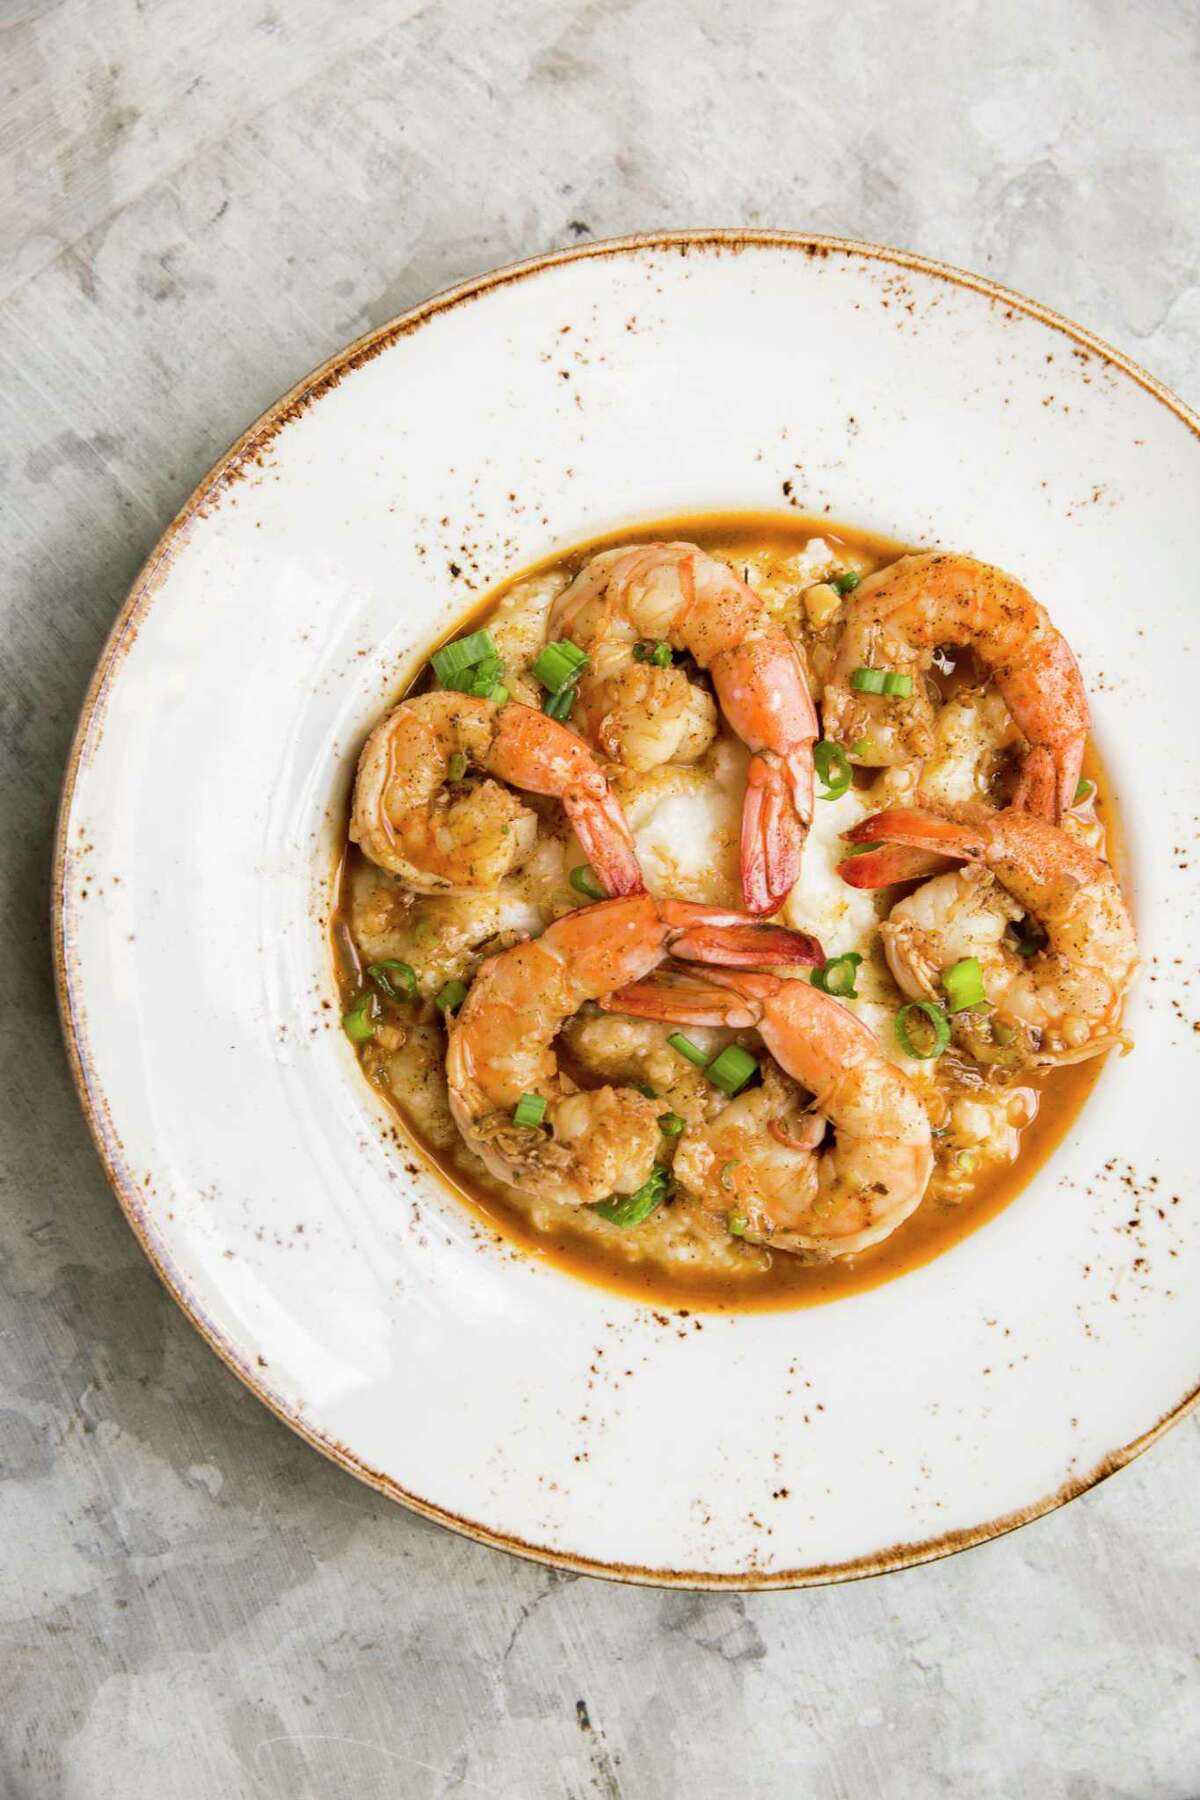 New Orleans-style barbecue shrimp over stone-ground grits at State Fare Kitchen & Bar, opening a new location this summer in Sugar Land.